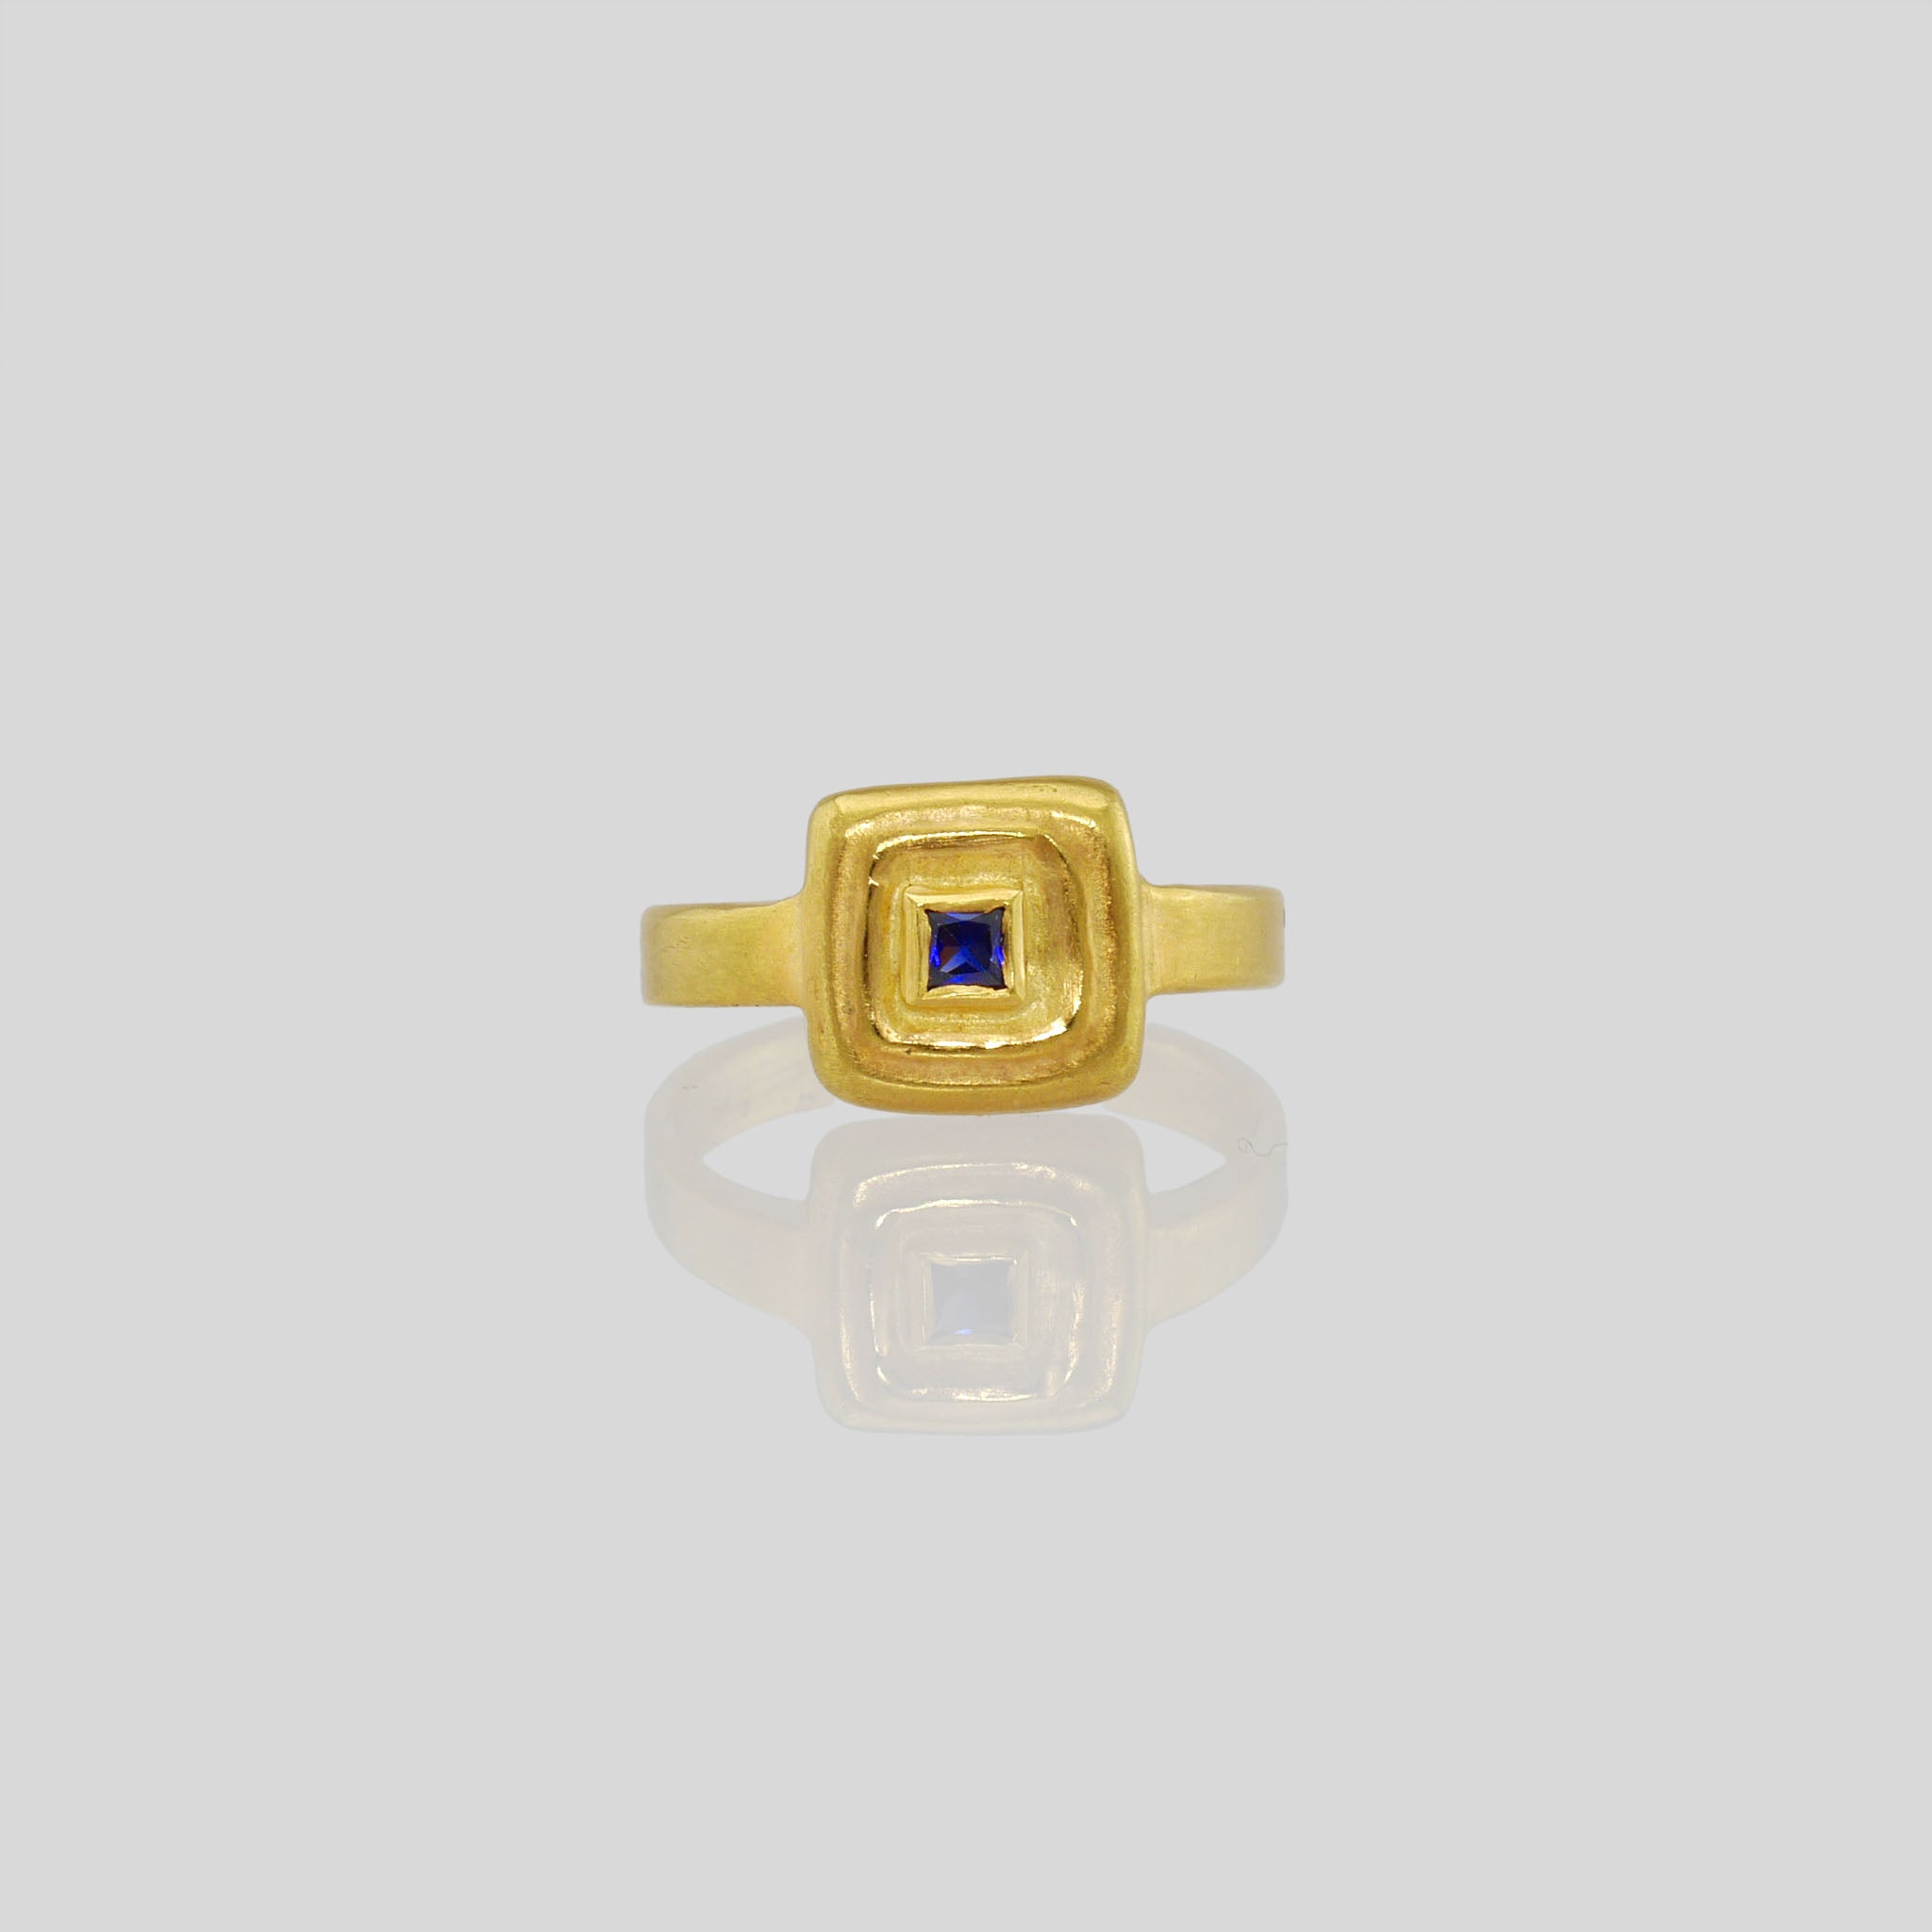 Front view of Handcrafted 18k Gold ring featuring a square Ruby set atop a square surface, evoking the ancient Egyptian era's golden jewelry of the Pharaohs.